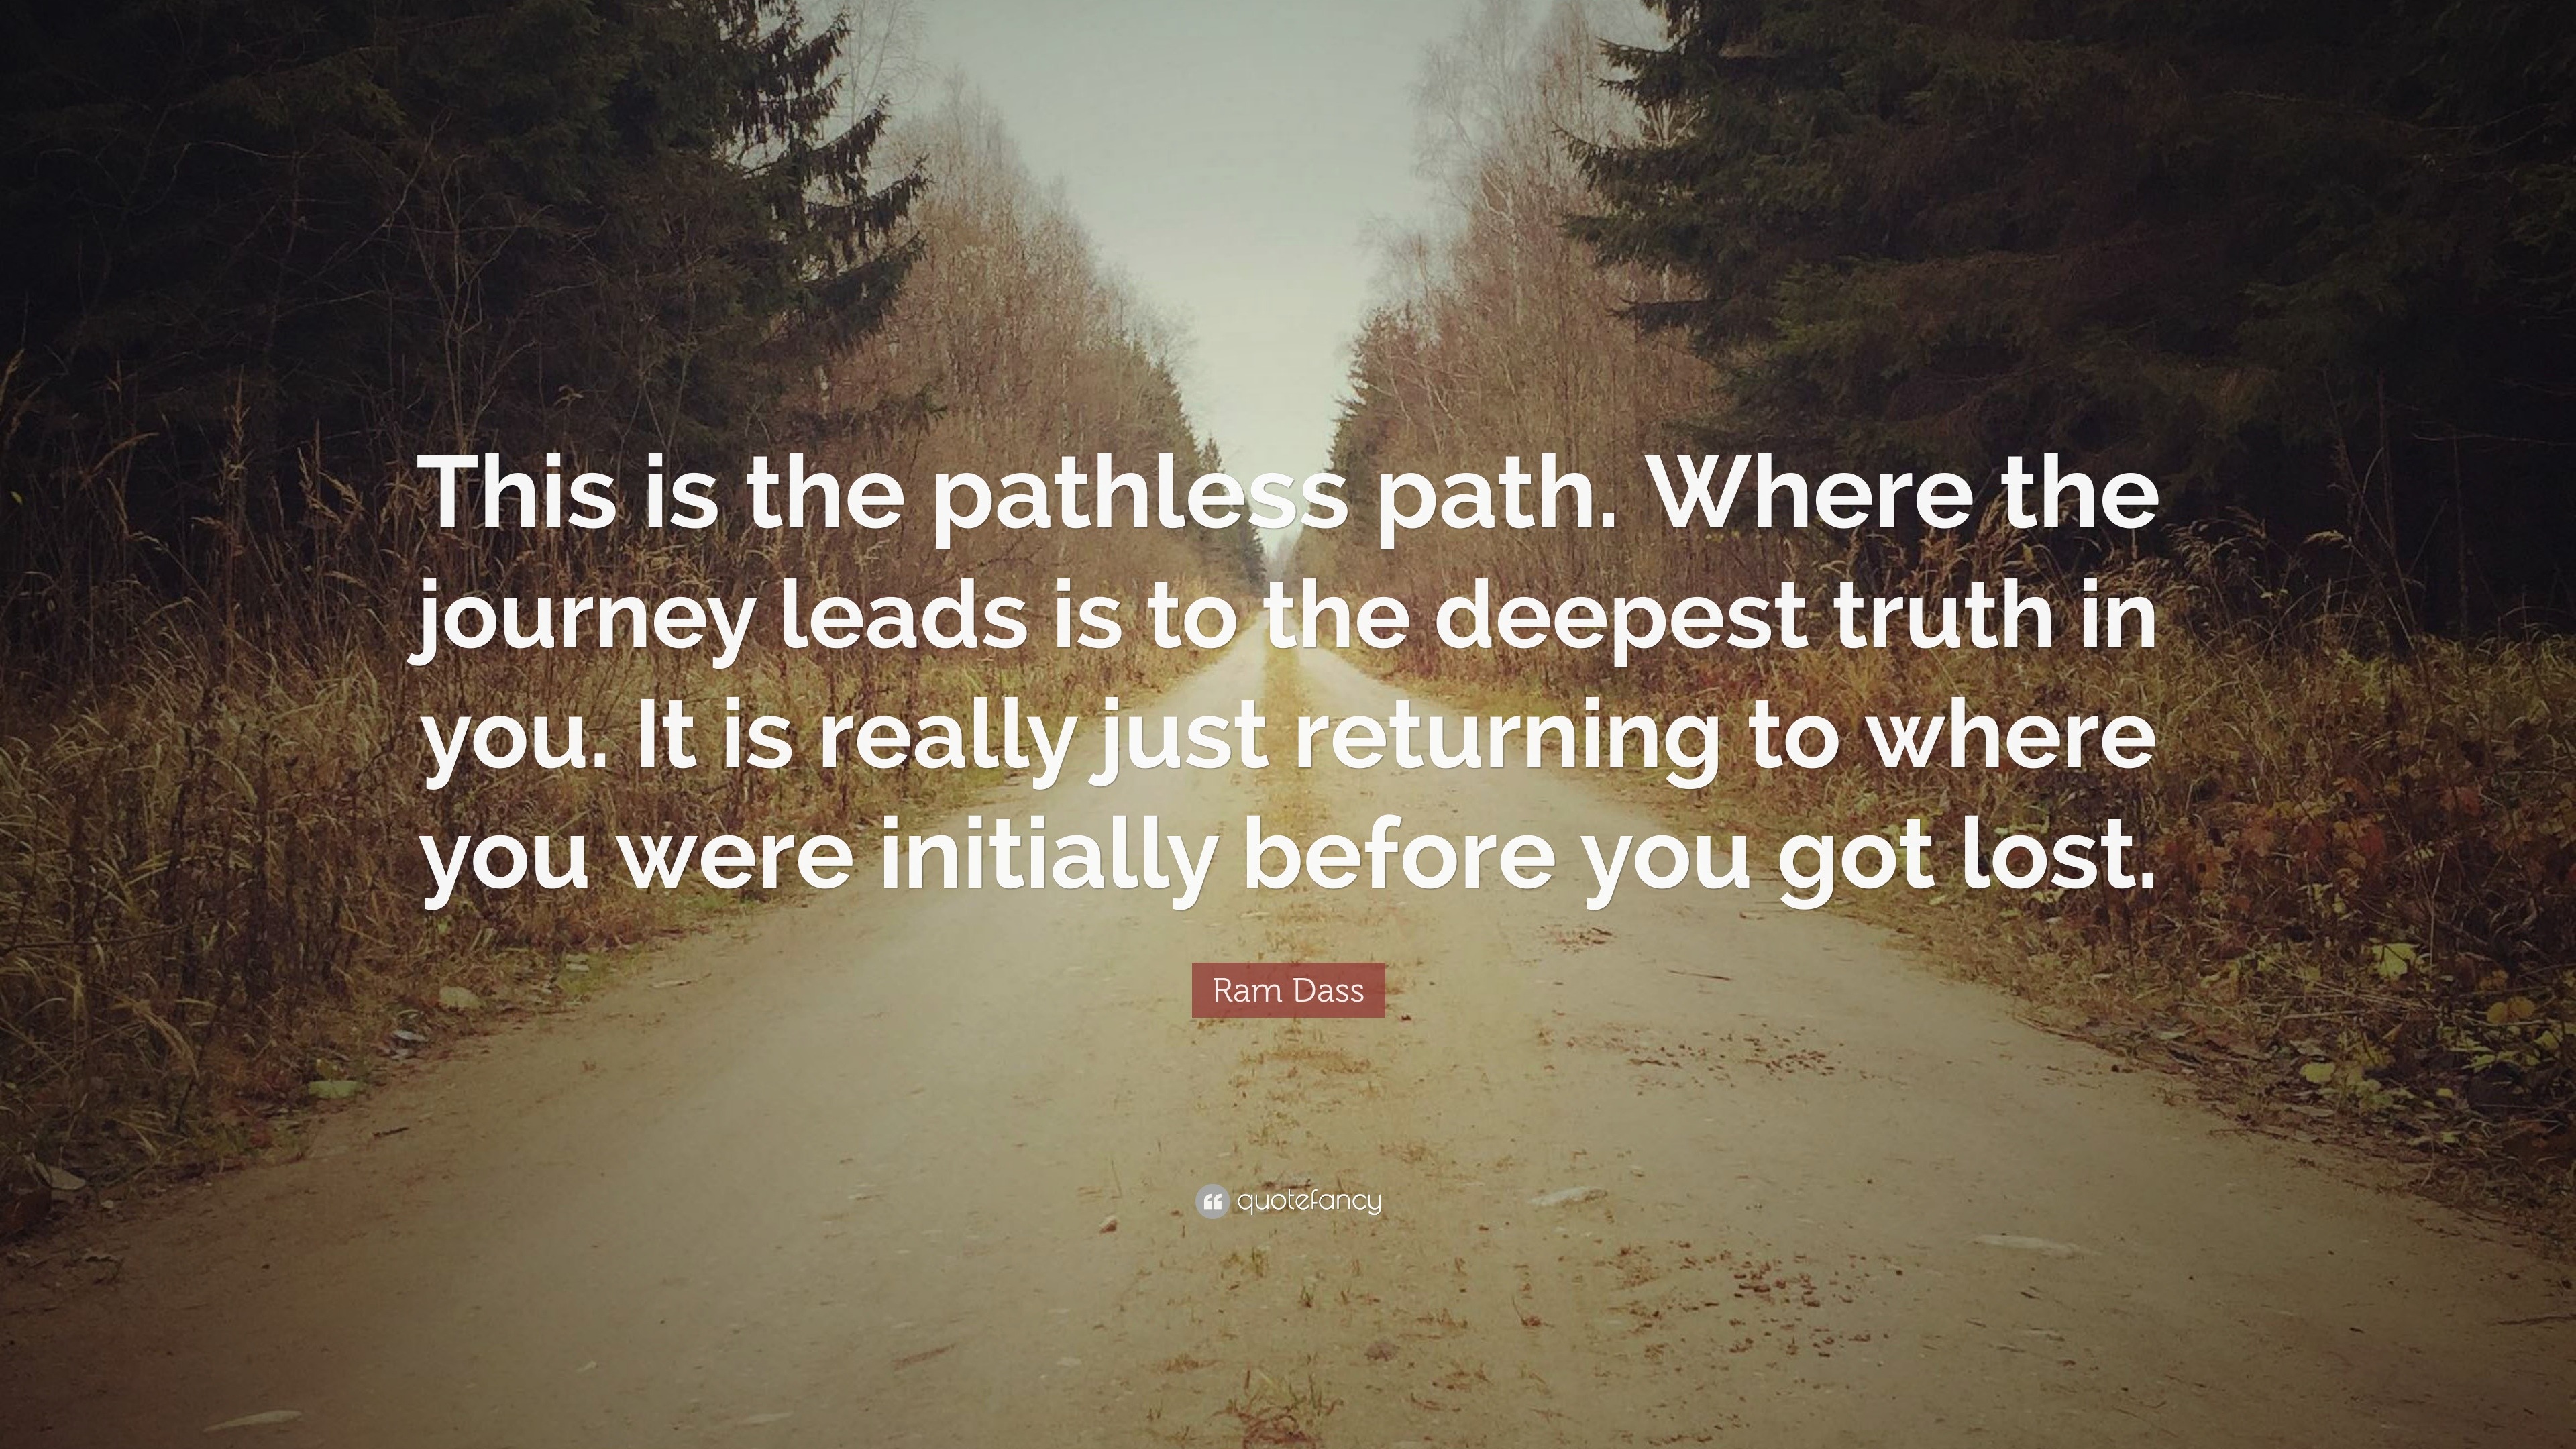 Ram Dass Quote “This is the pathless path. Where the